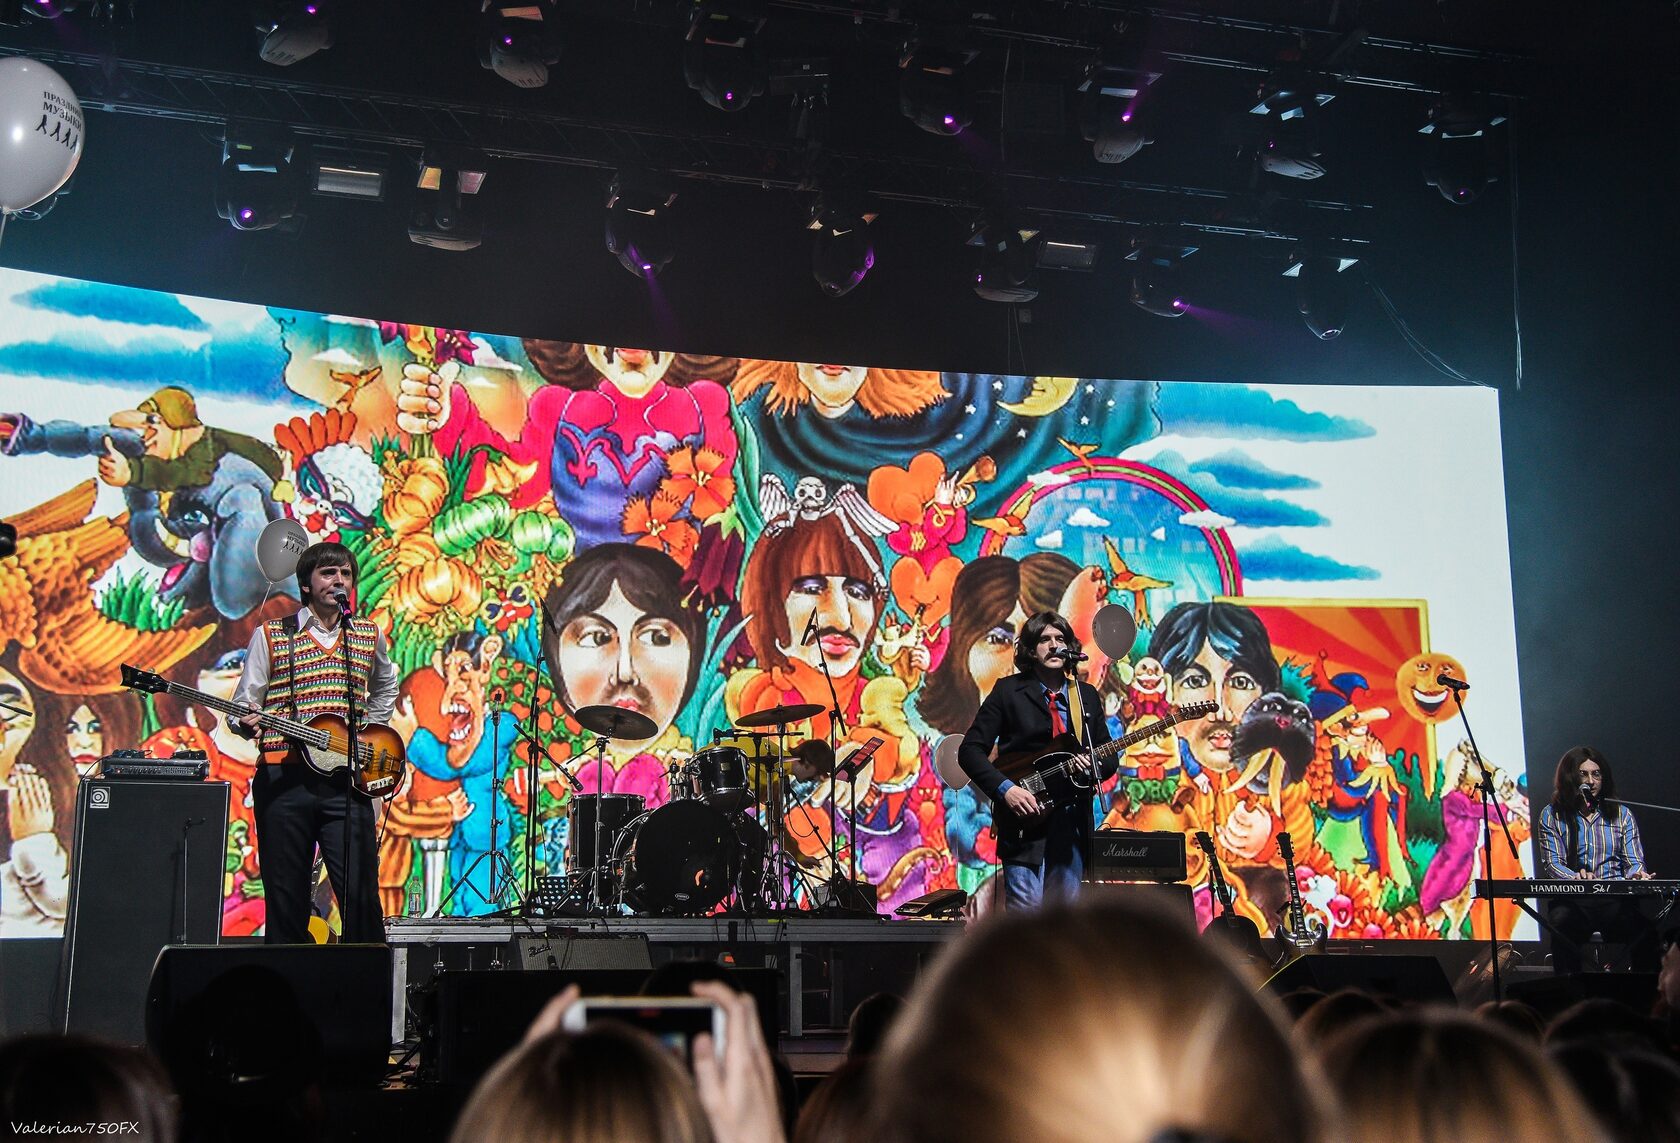 The Beatles Tribute